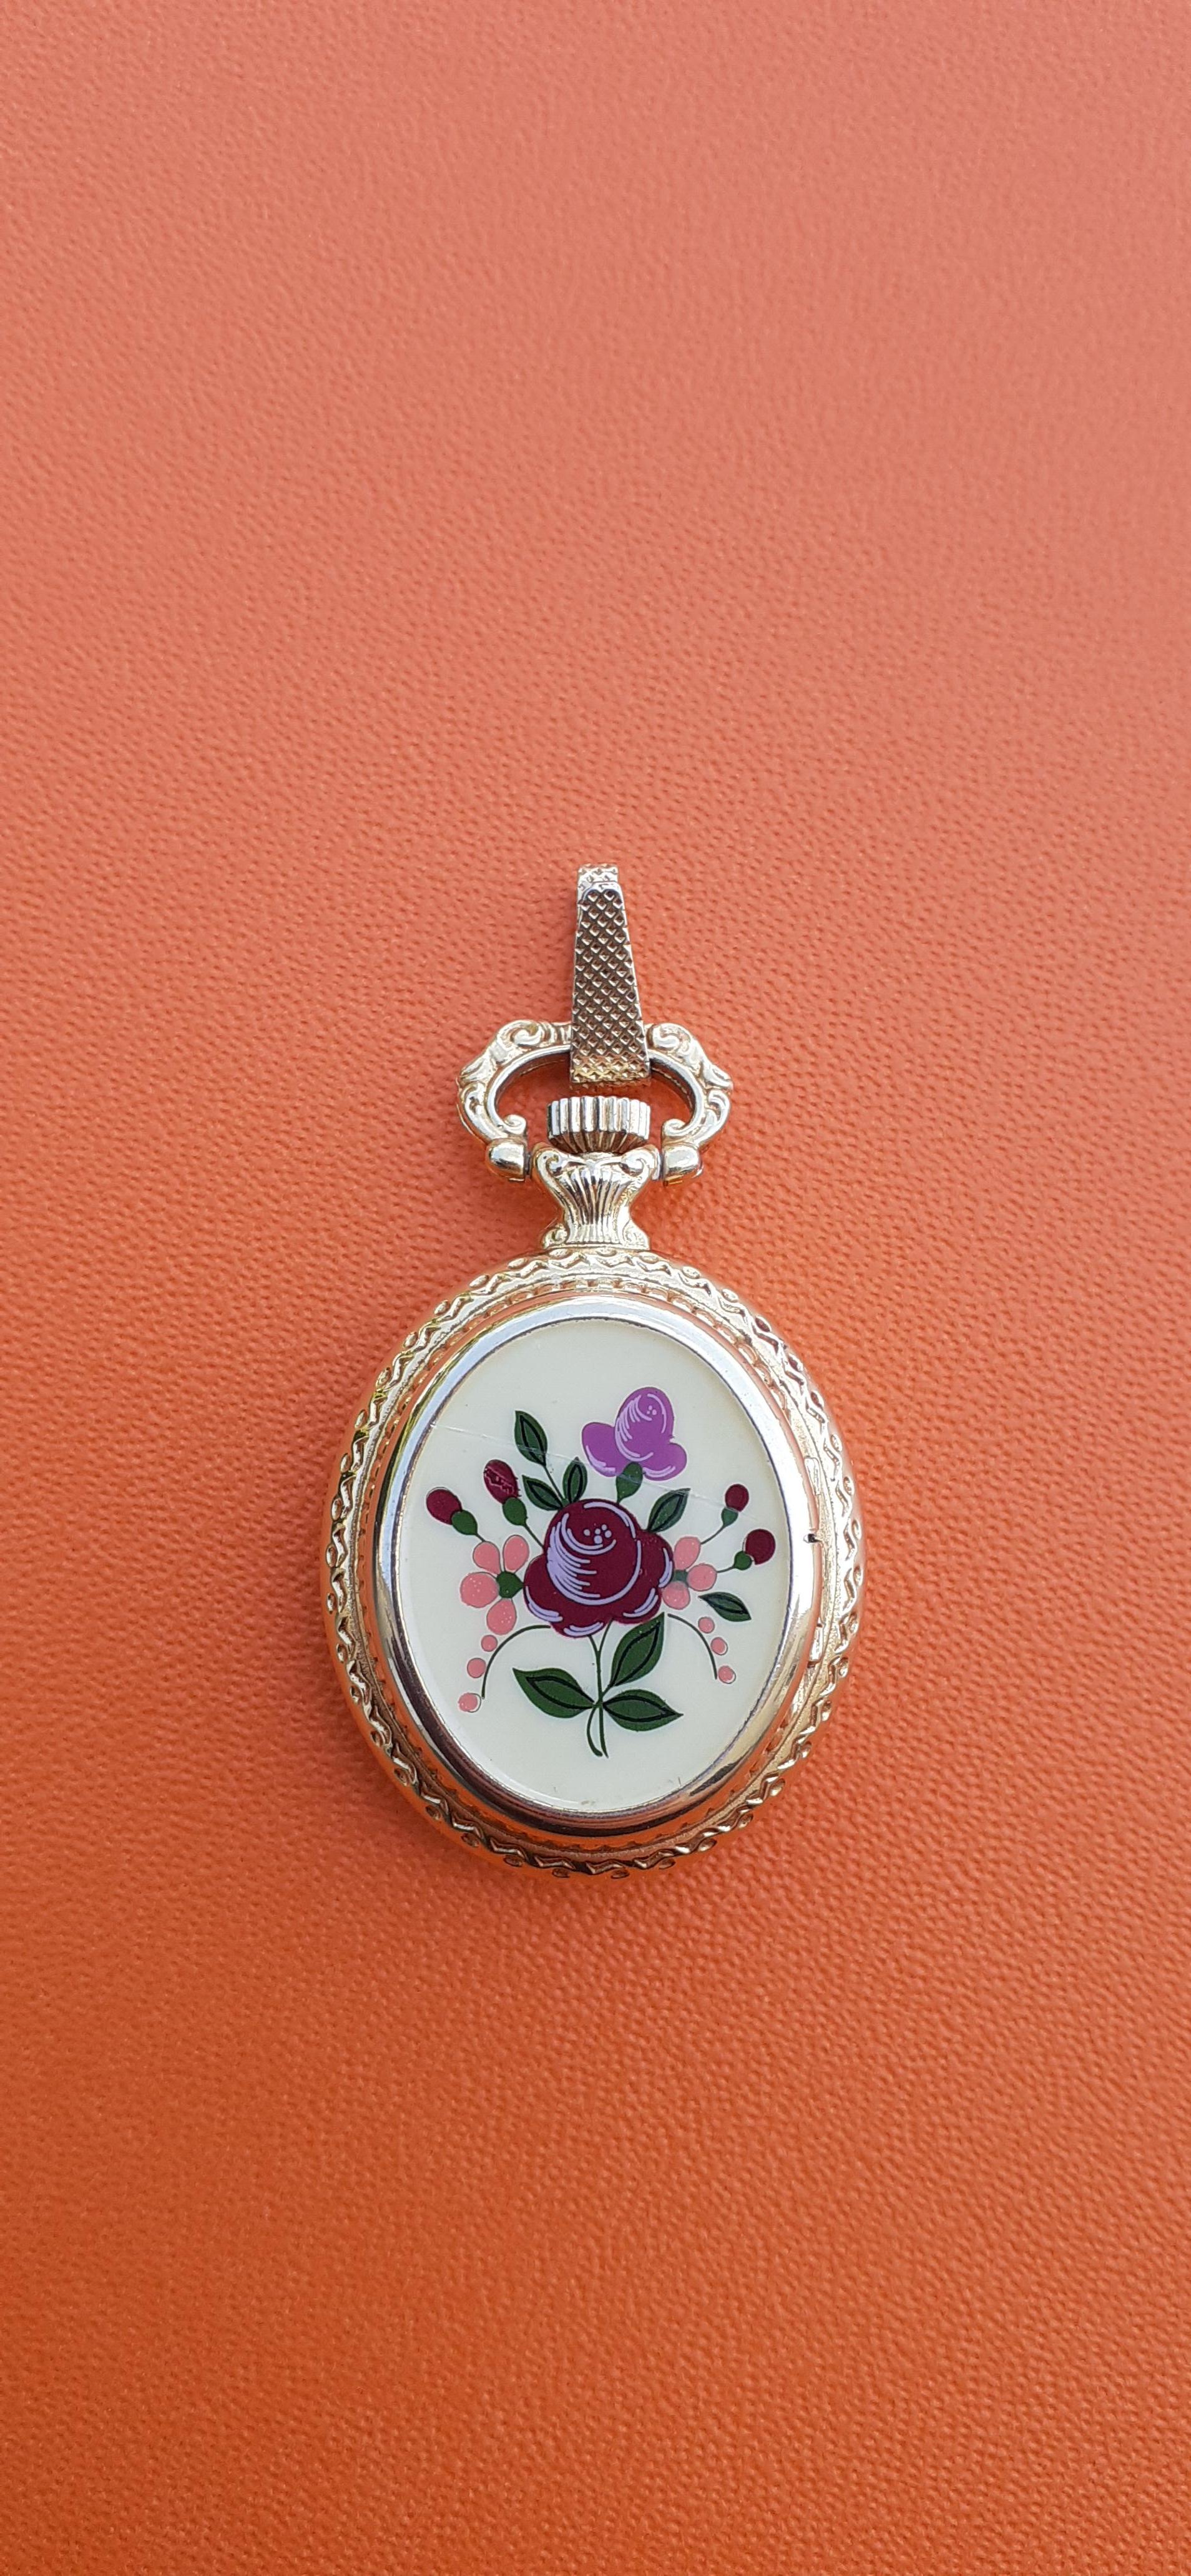 Extremely Rare Authentic Hermes Watch

Exceptional Watch hidden in a golden metal pendant, the lid decorated with enamel printed with flowers.

To wear as a pendant (the dial has been fixed upside down for this purpose)

Please notice: the chain on